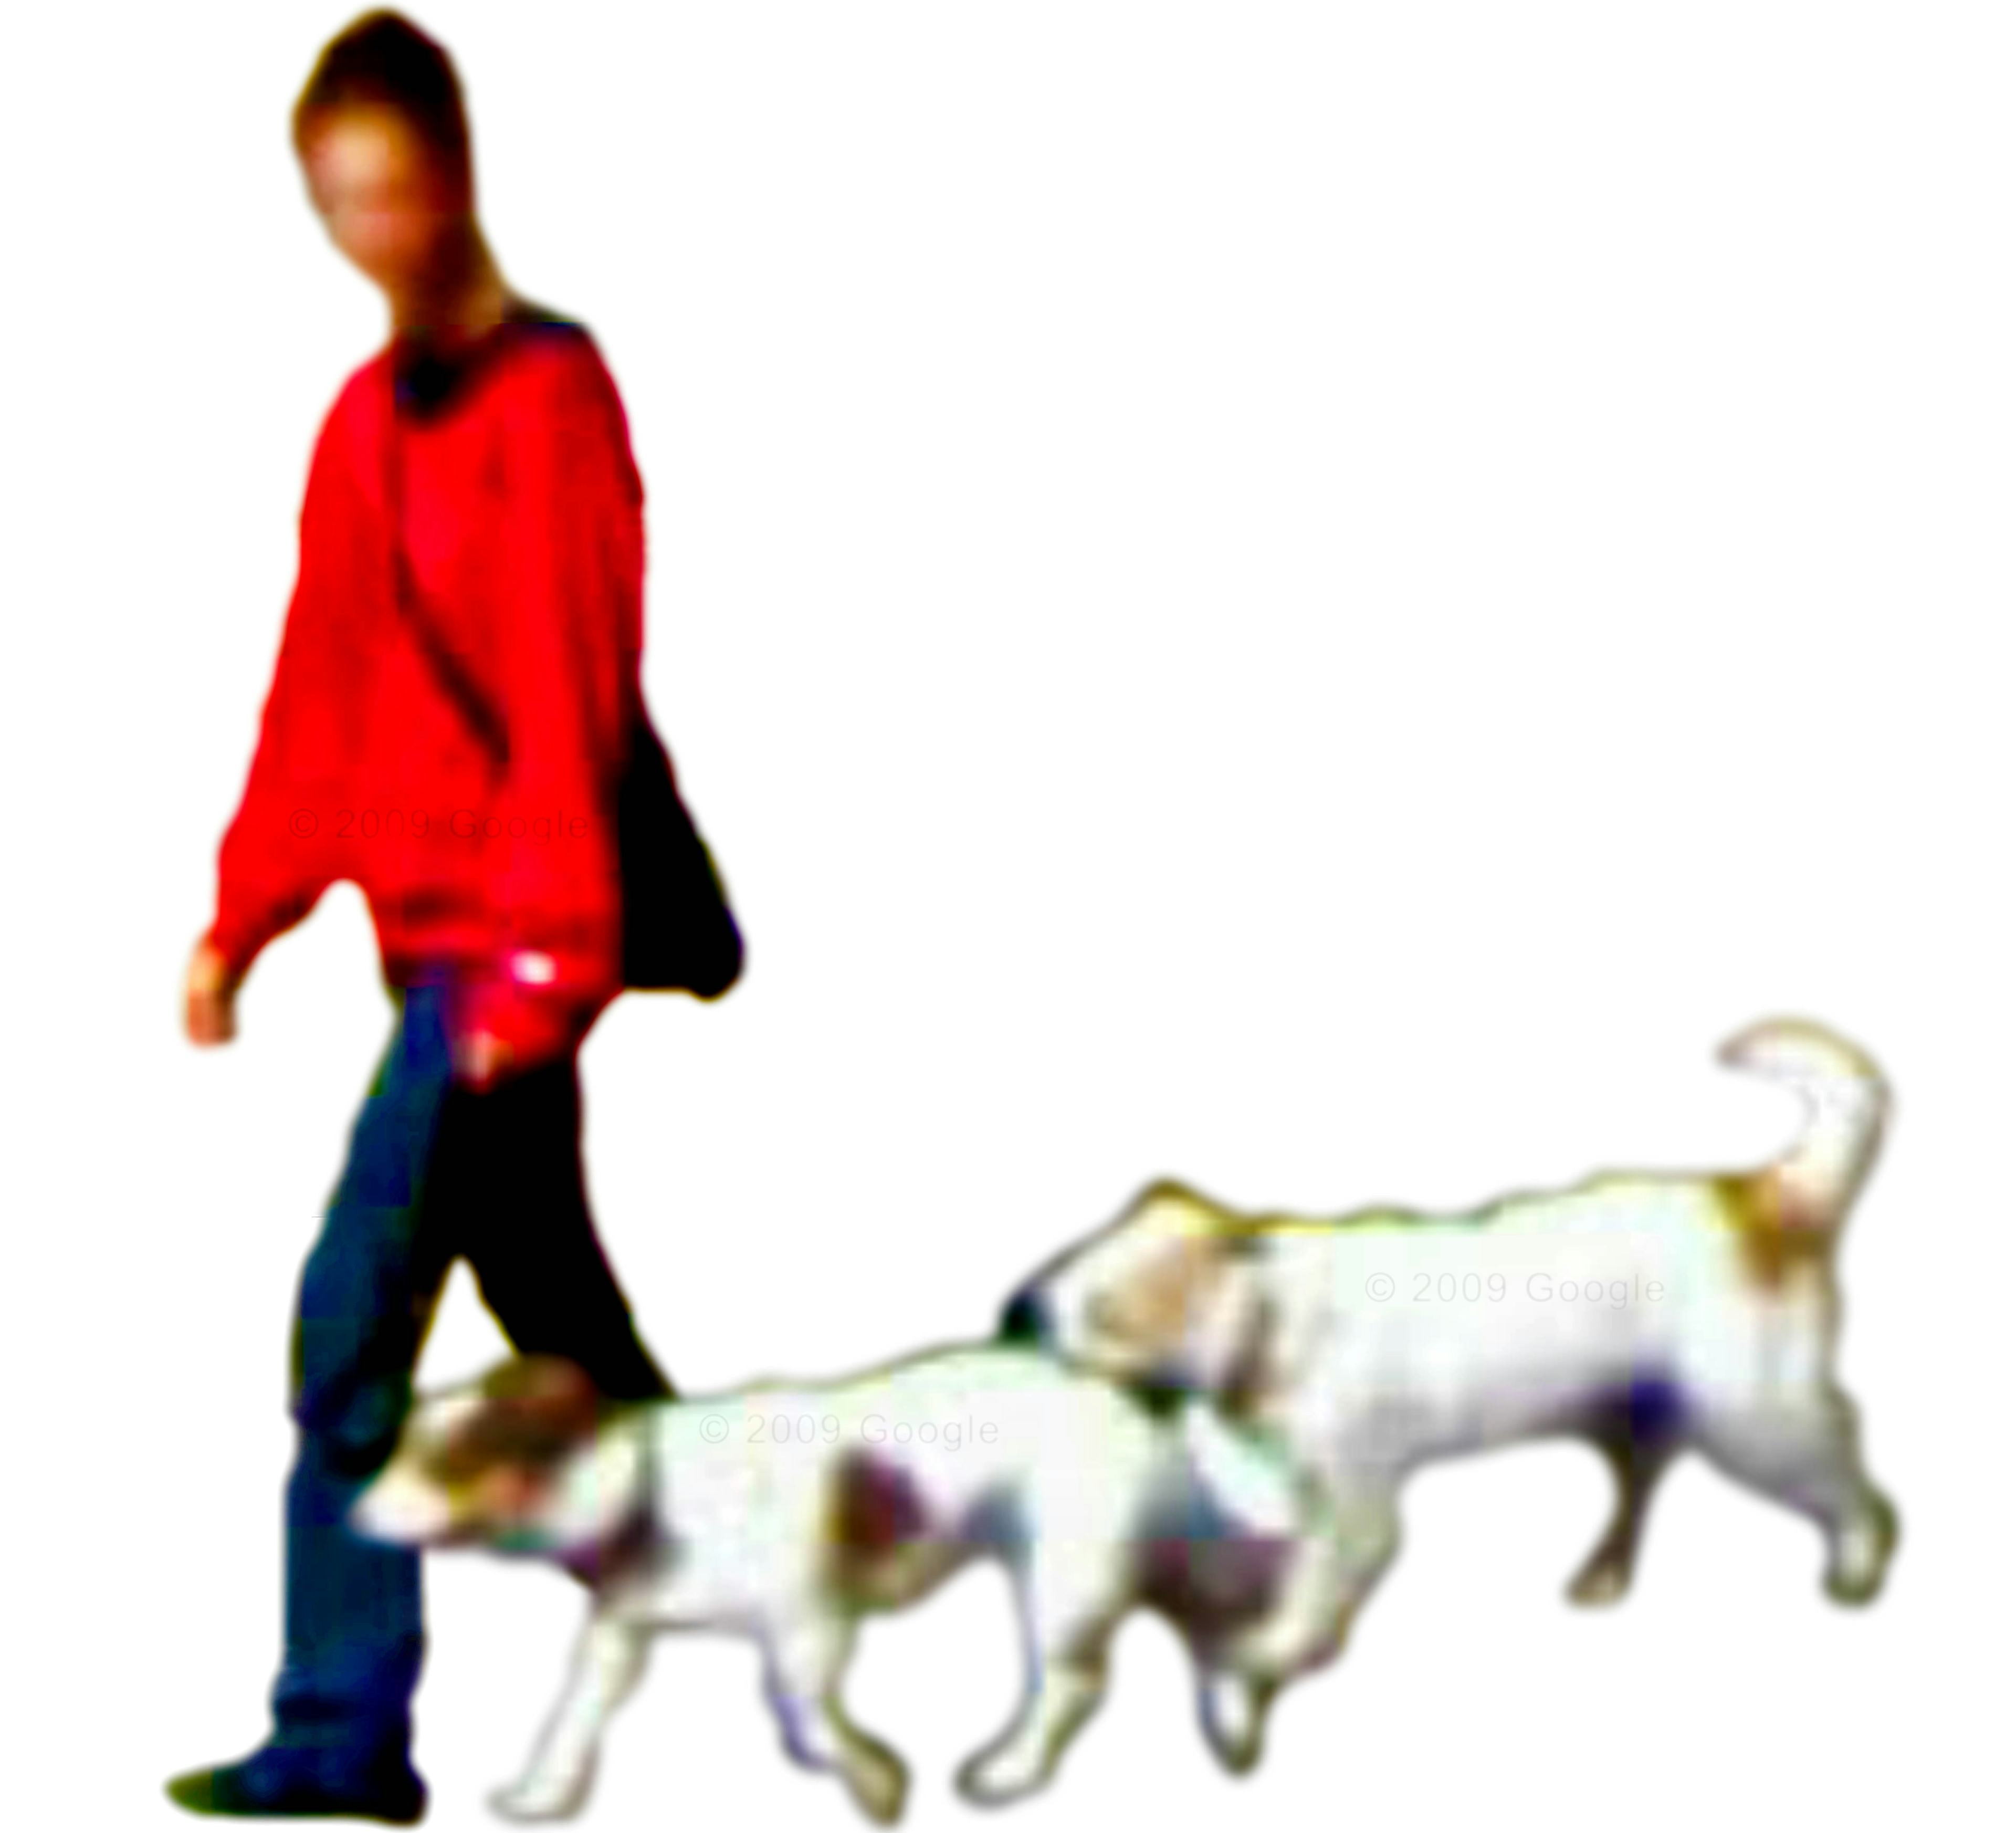 Blurry image of man with dogs walking